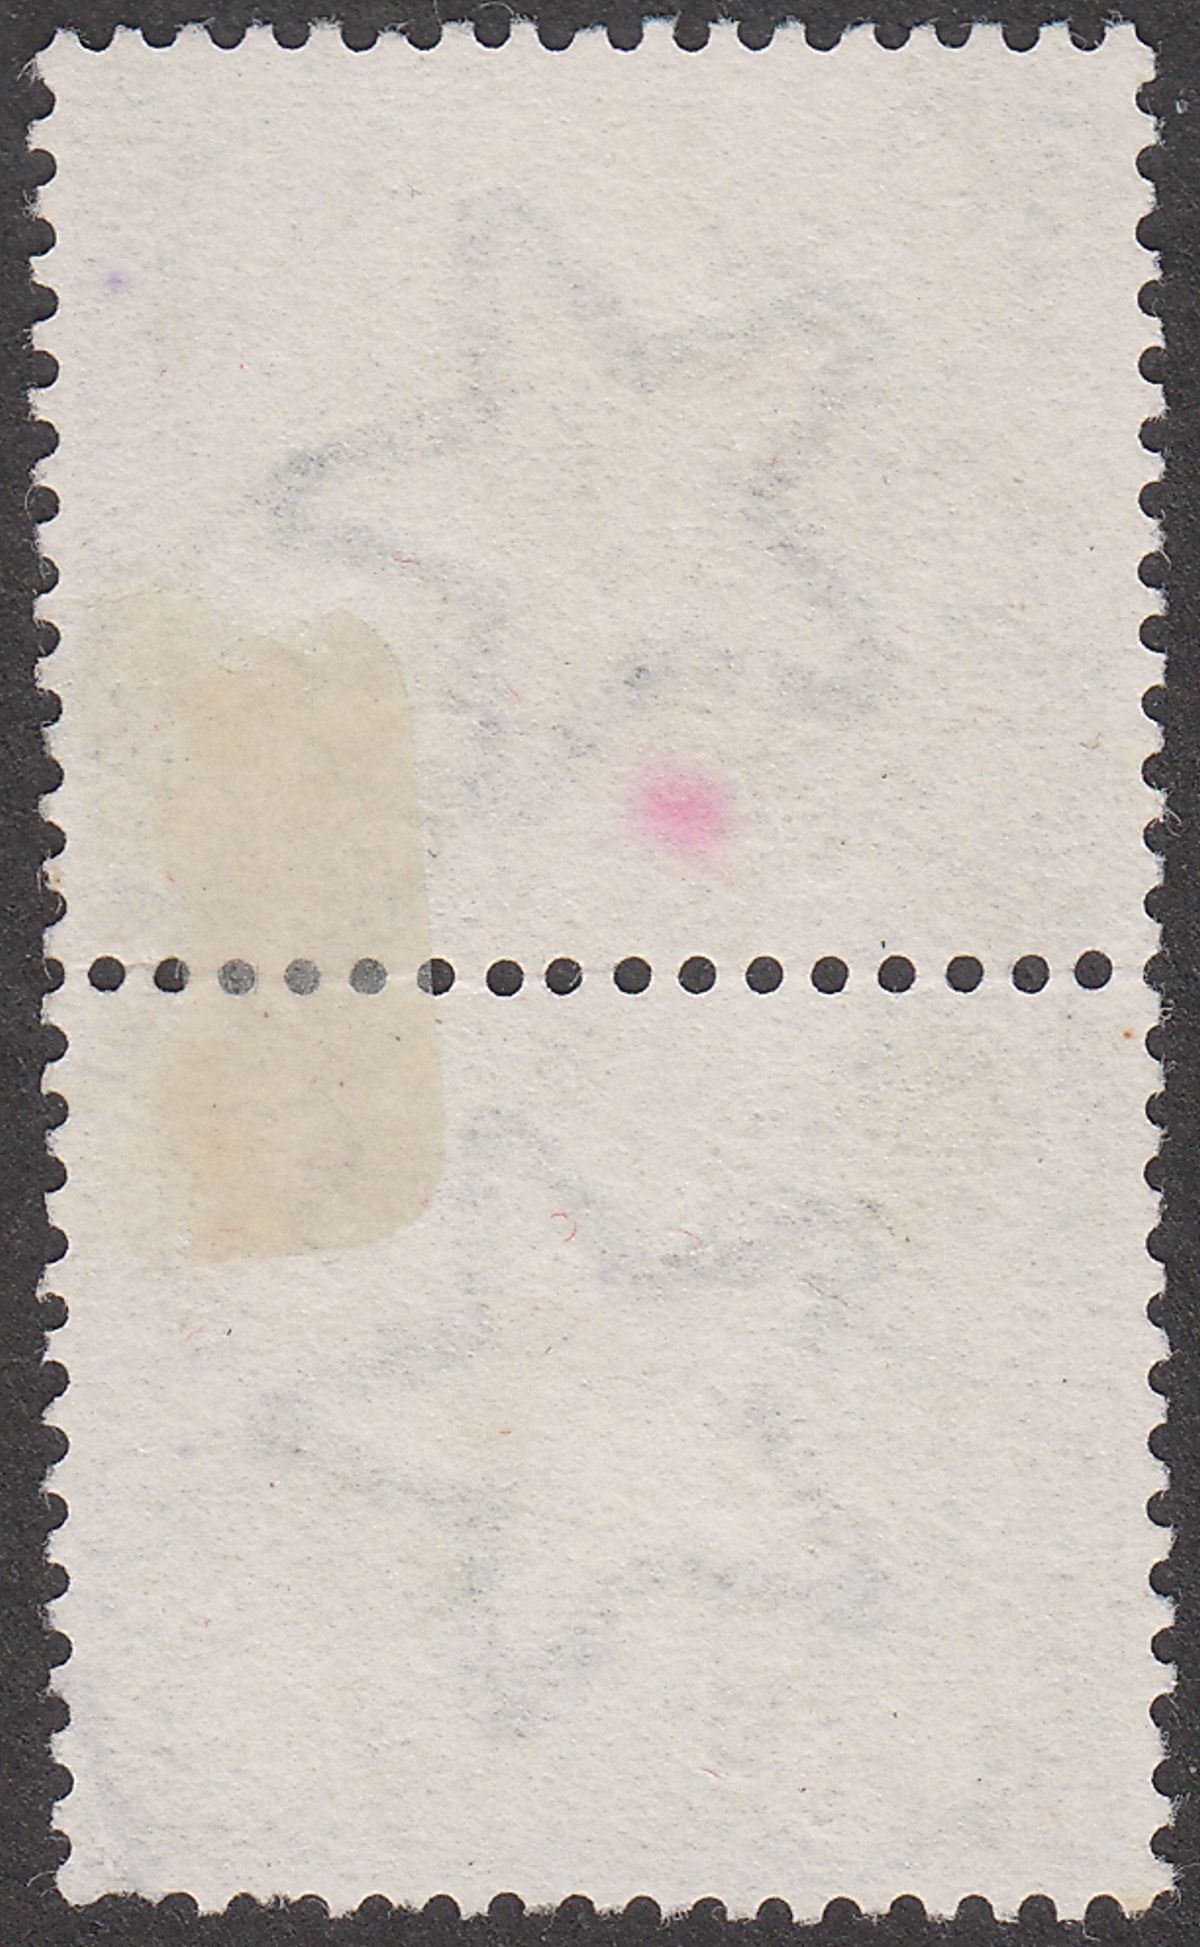 India 1916 KGV Expeditionary Forces IEF ½a Pair Used FPO No 18 Postmark France